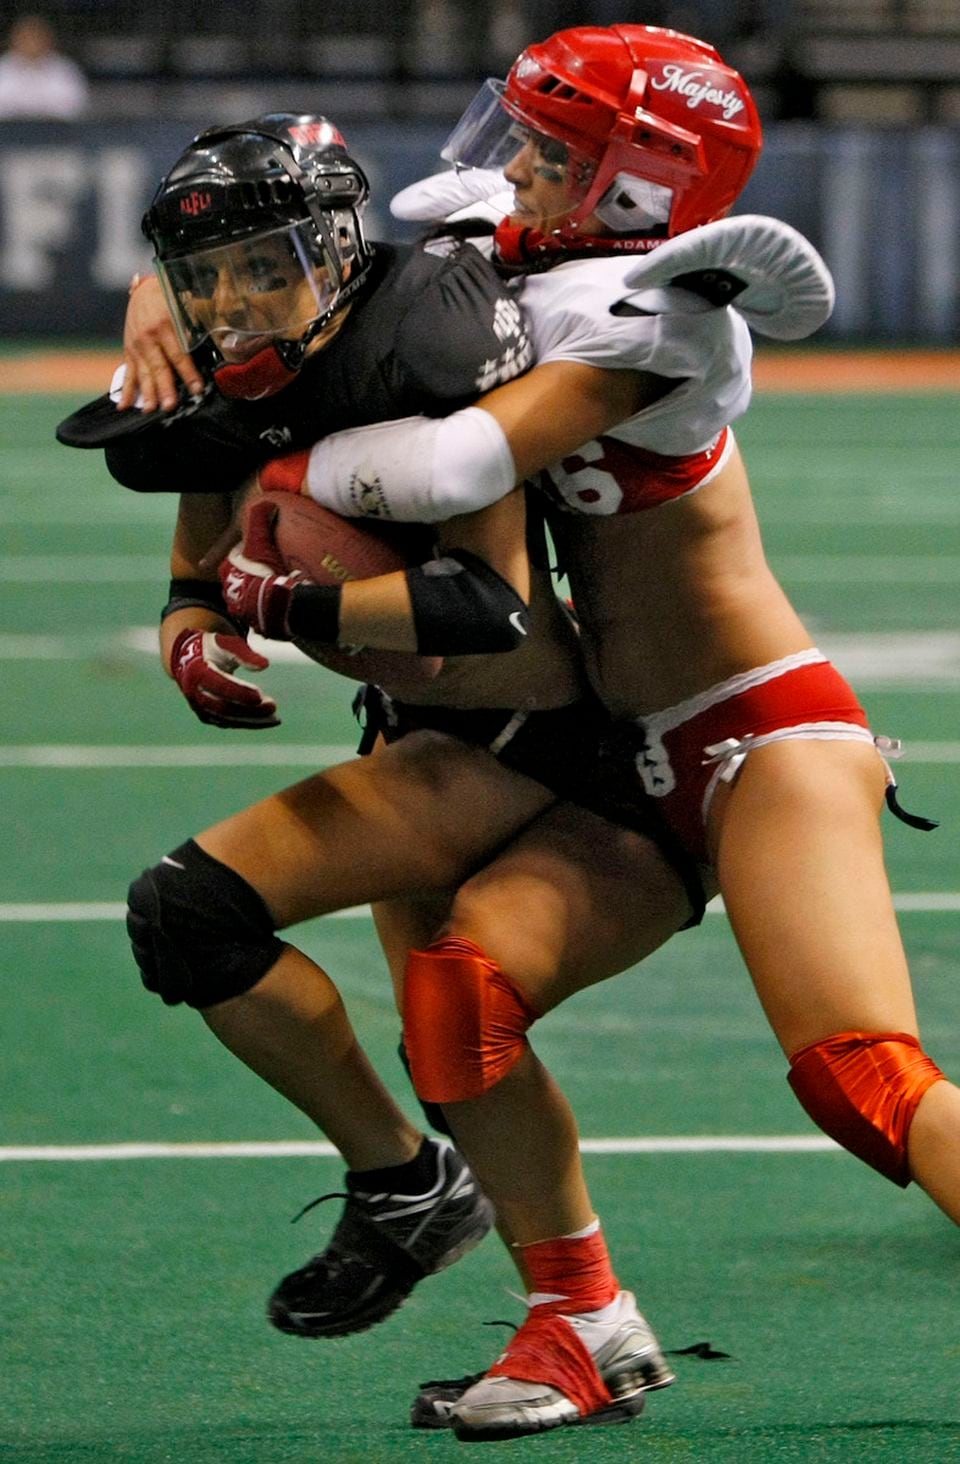 angie endres recommends lingerie football league malfunctions pic